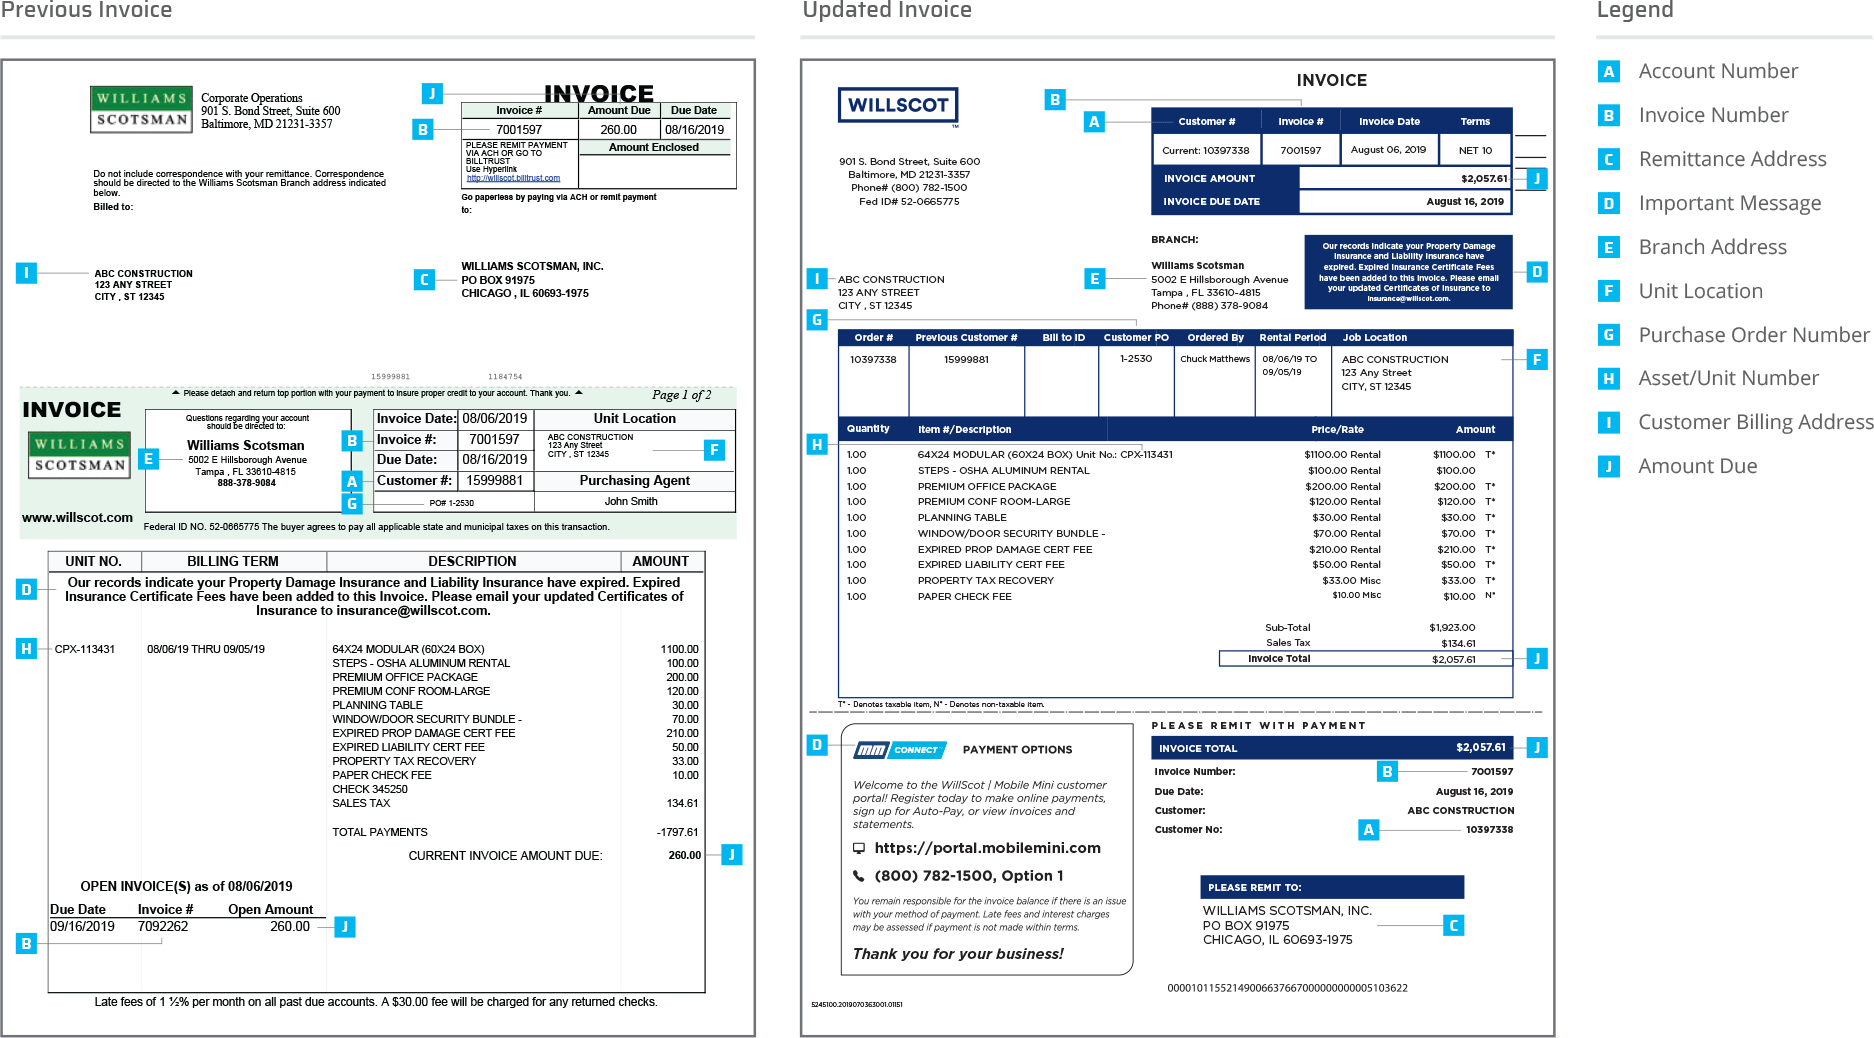 Image showing difference between Williams Scotsman and WillScot invoices